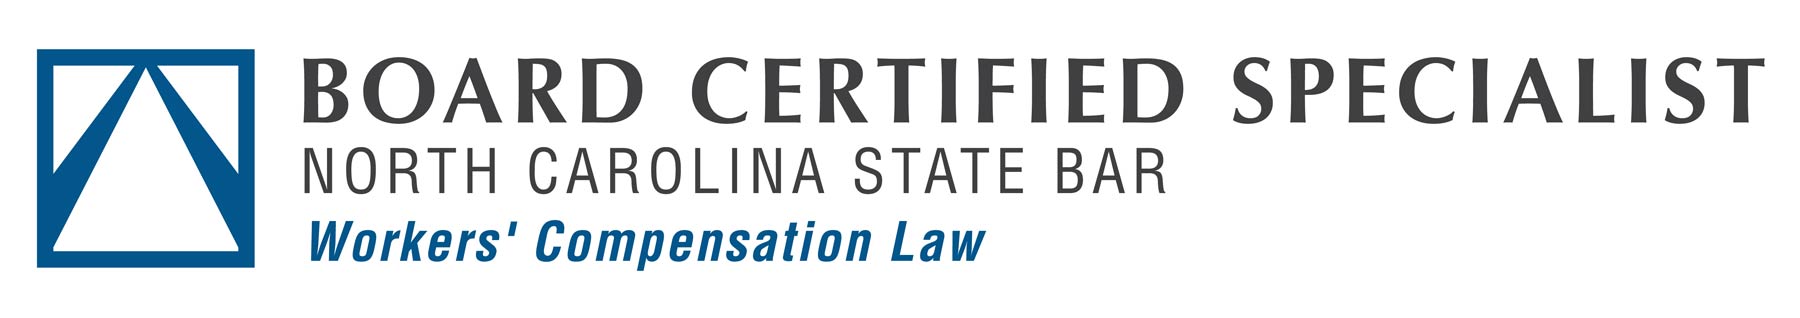 North Carolina Workers' Compensation Board Certified Specialist